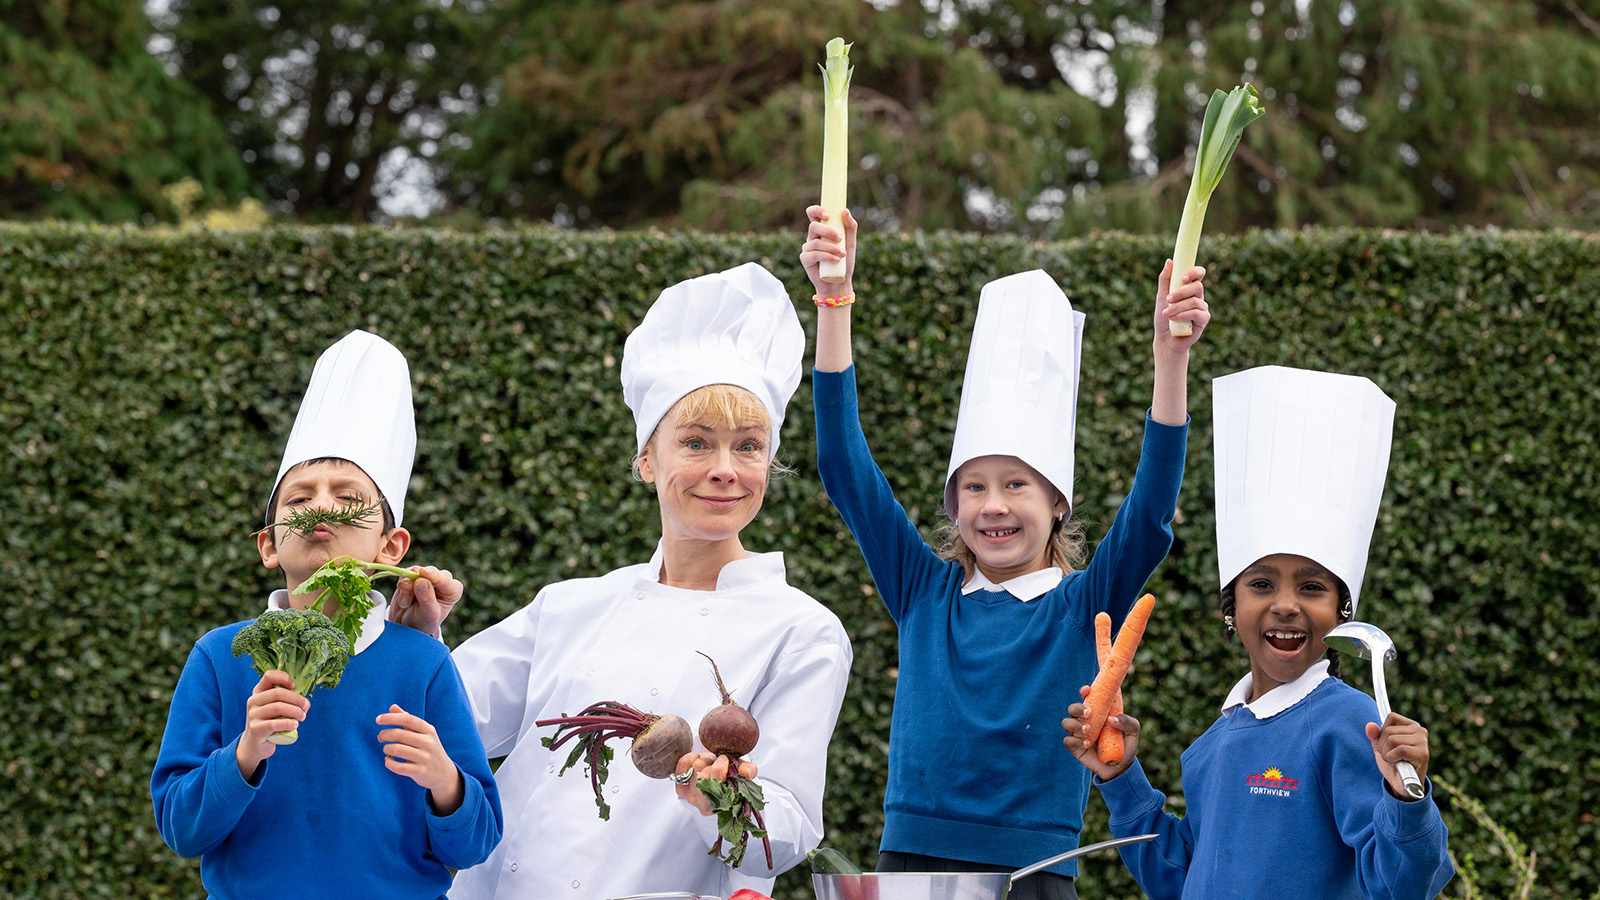 A woman with blonde hair wearing a traditional white chef's outfit and hat and three young children in bright blue jumpers hold up various vegetables